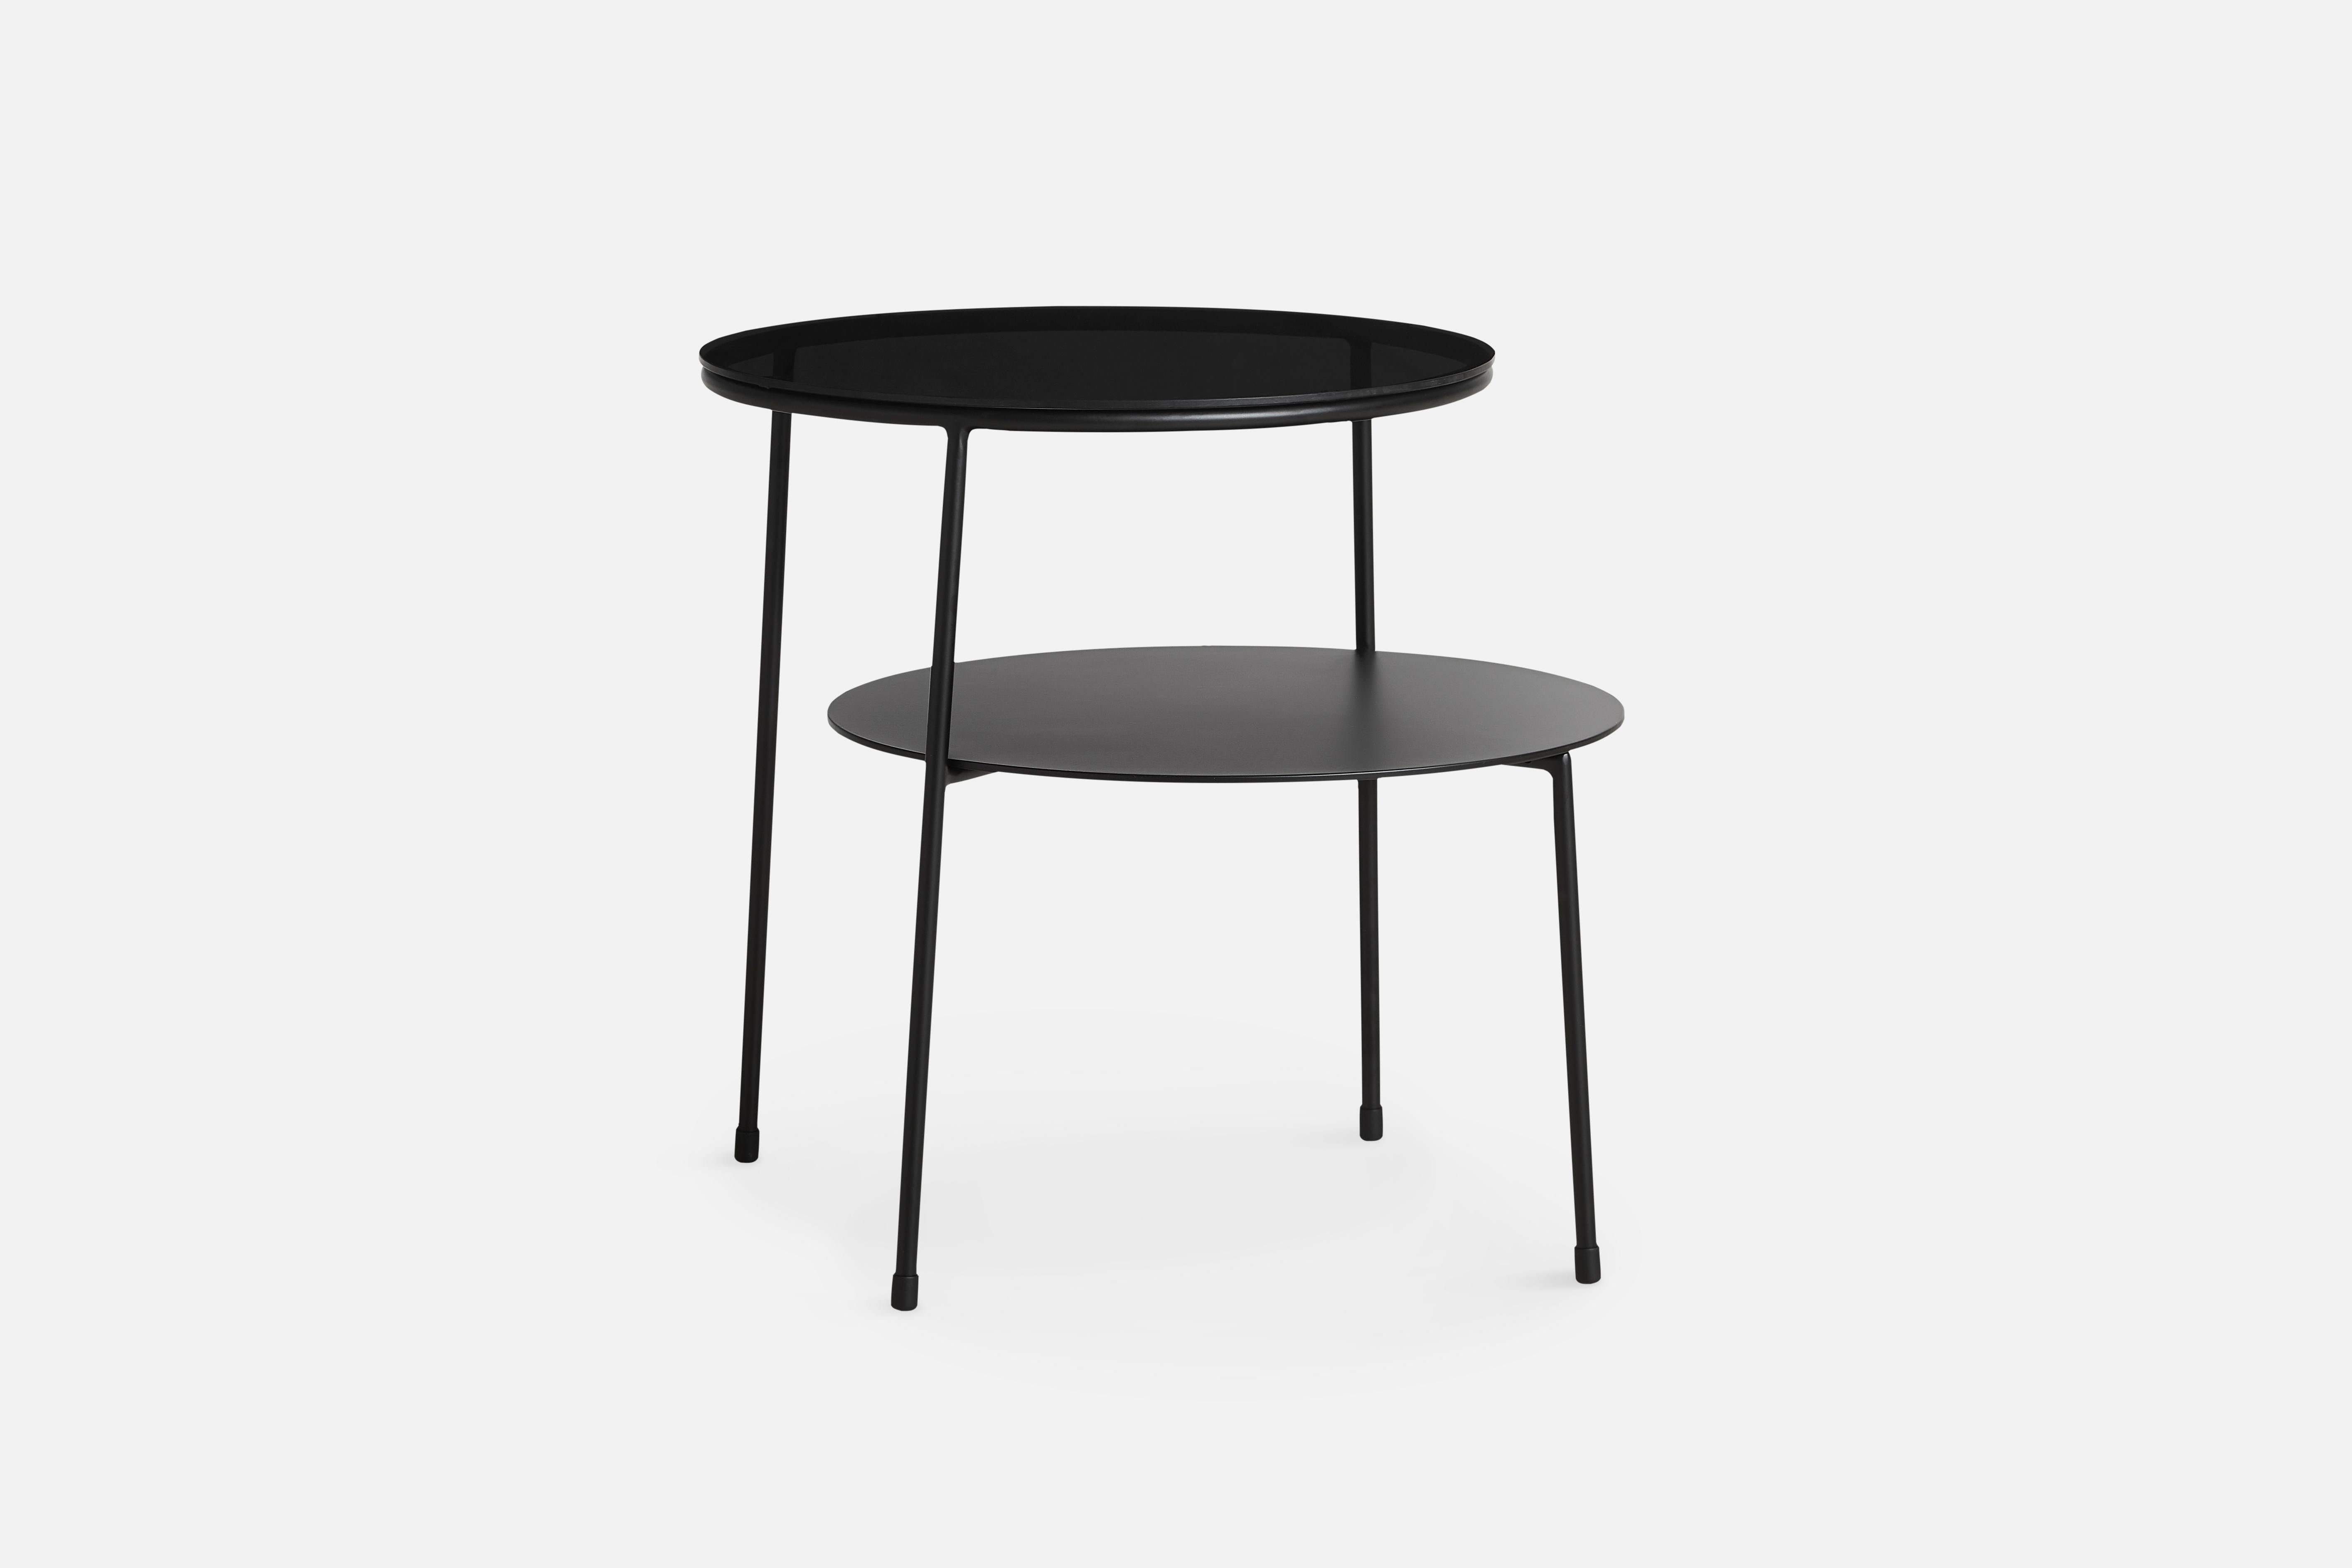 Duo side table by Chifen Cheng
Materials: Metal, Glass
Dimensions: D 51 x W 60 x H 51 cm

The founders, Mia and Torben Koed, decided to put their 30 years of experience into a new project. It was time for a change and a new challenge. The